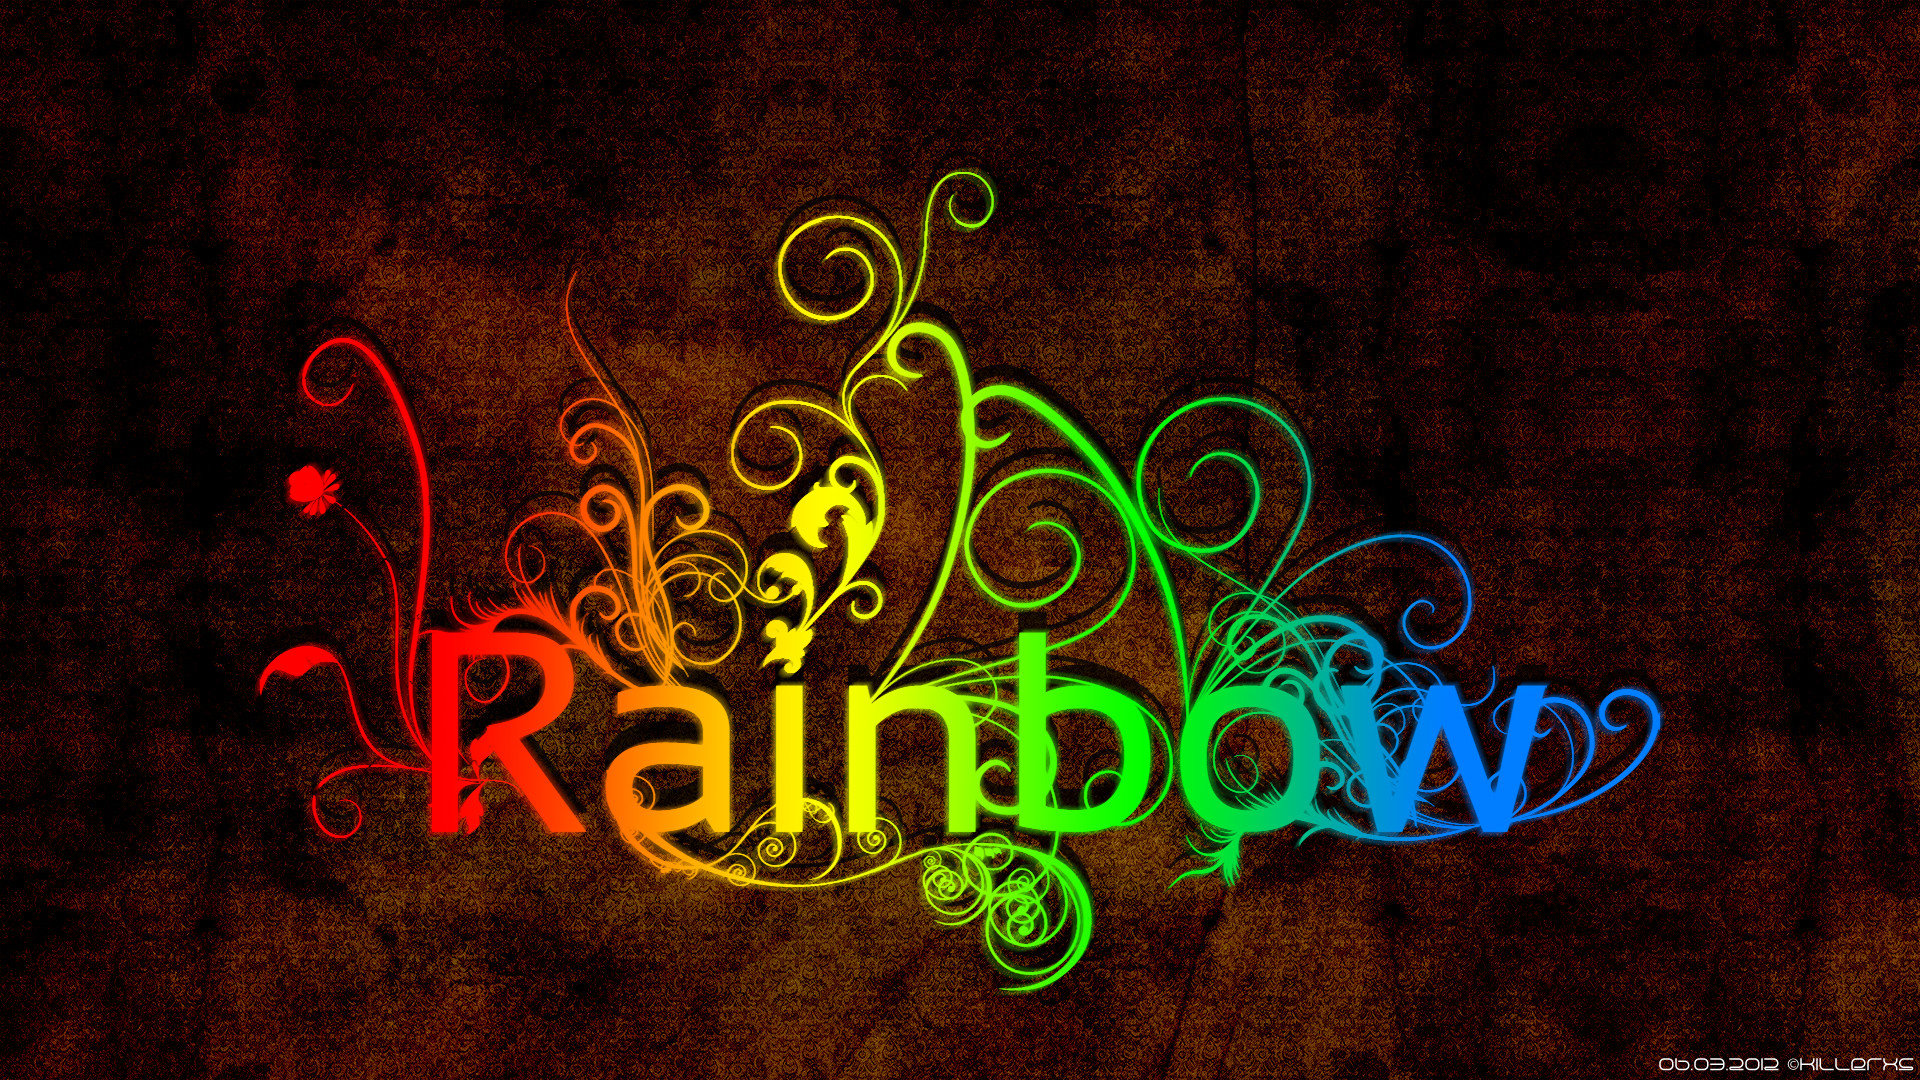 Free download Colorful background ID:421746 hd 1920x1080 for PC